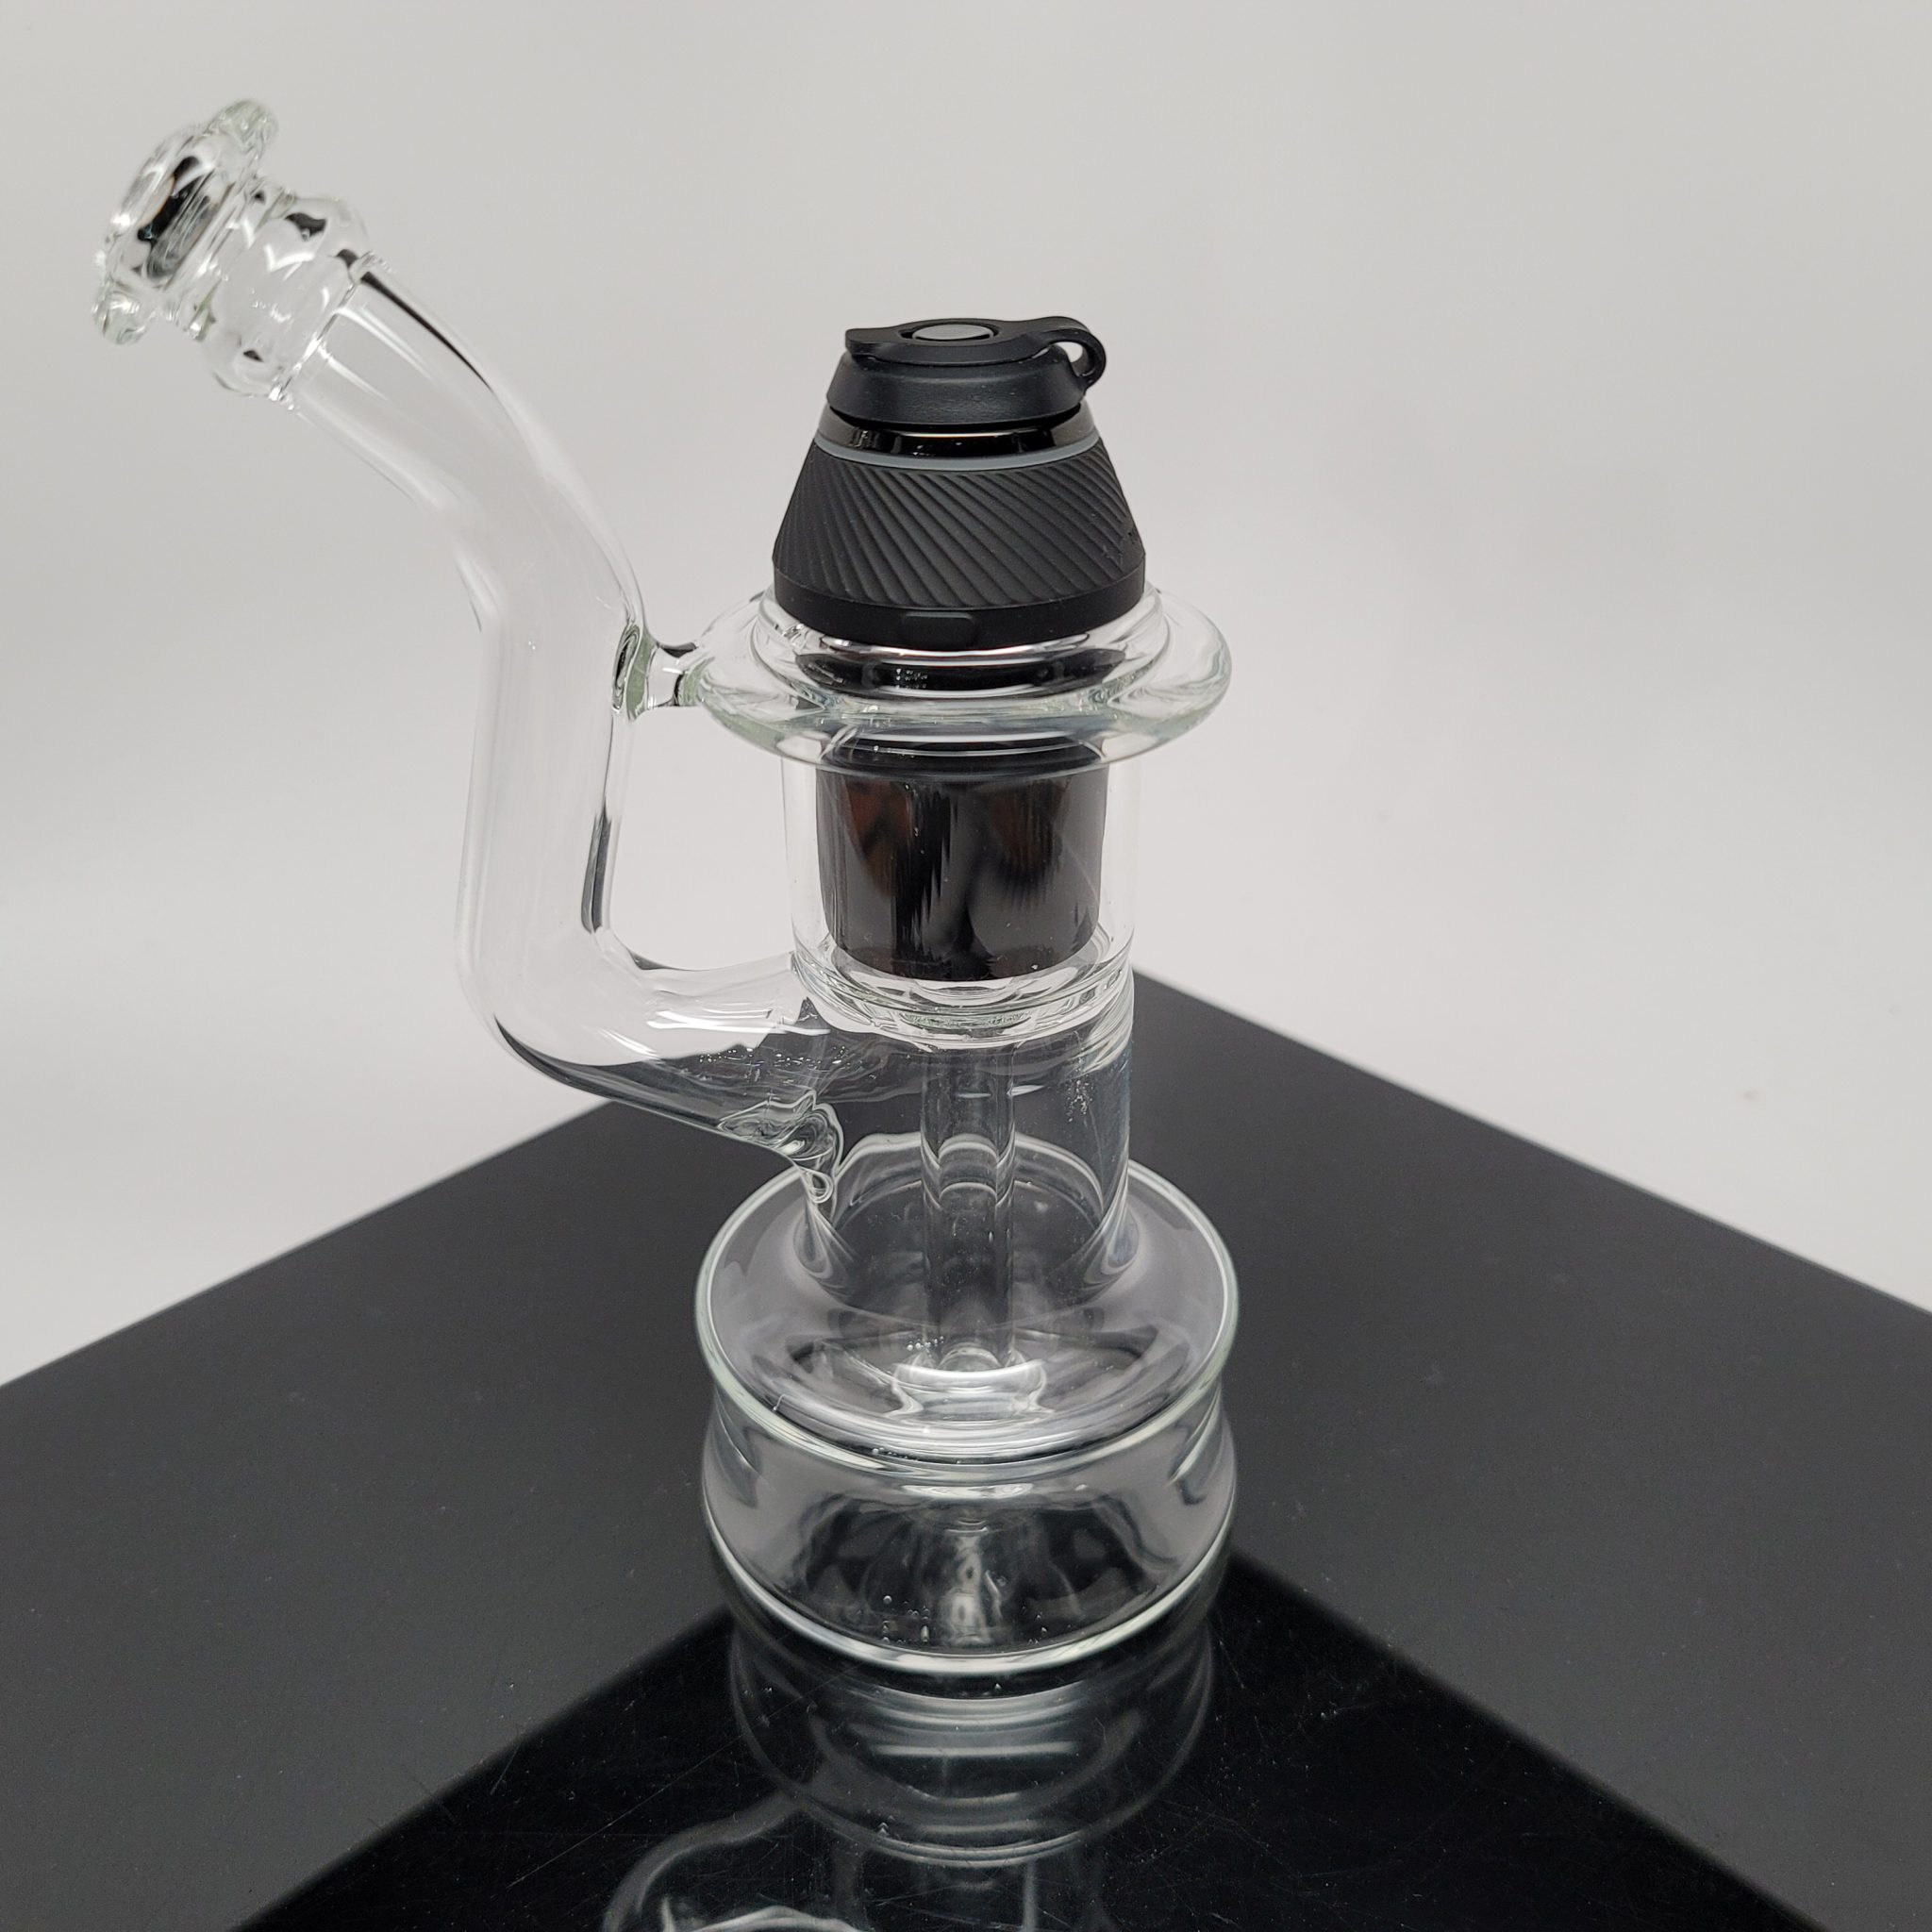 puffco proxy Denver's Best Online Smoke Shop 710 Pipes